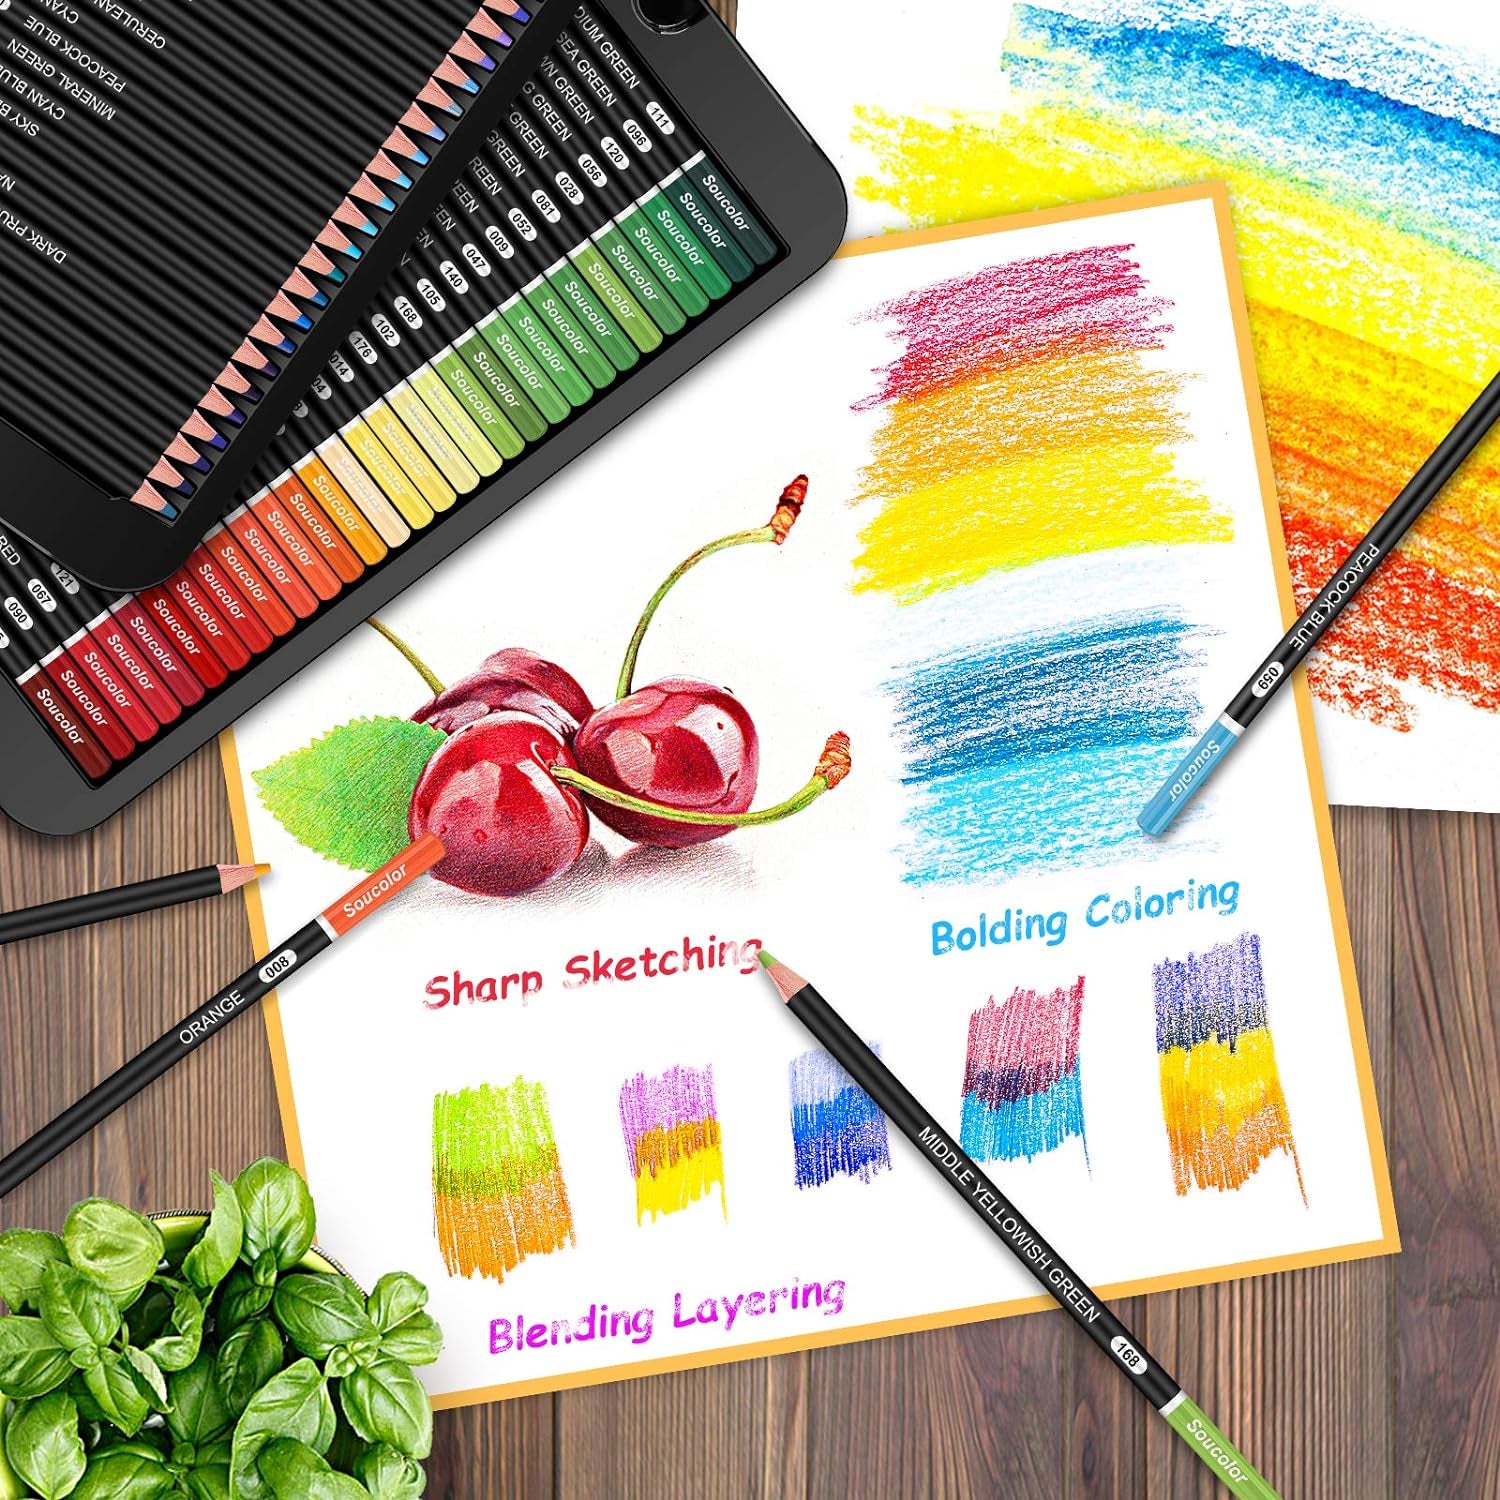 180-Color Artist Colored Pencils Set for Adult Coloring Books, Soft Core, Professional Numbered Art Drawing Pencils for Sketching Shading Blending Crafting, Gift Tin Box for Beginners Kids